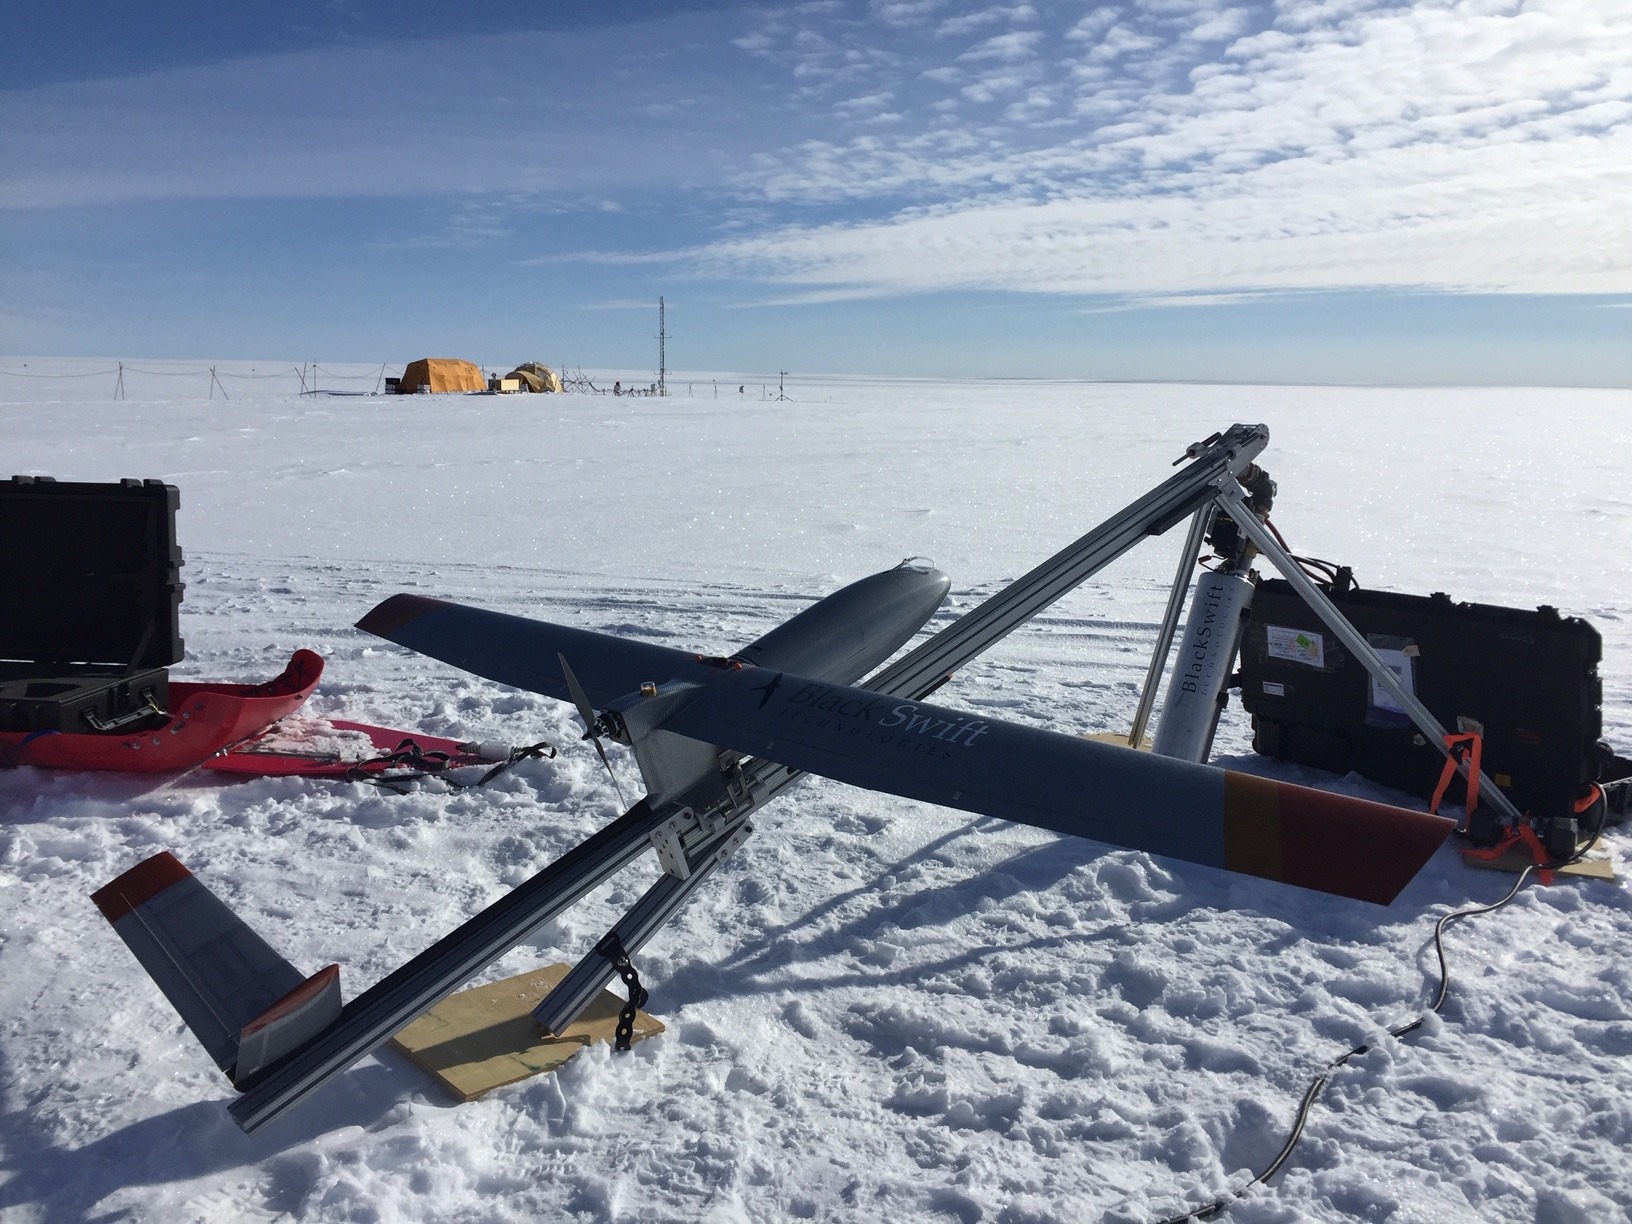 unmanned aircraft system in the snow